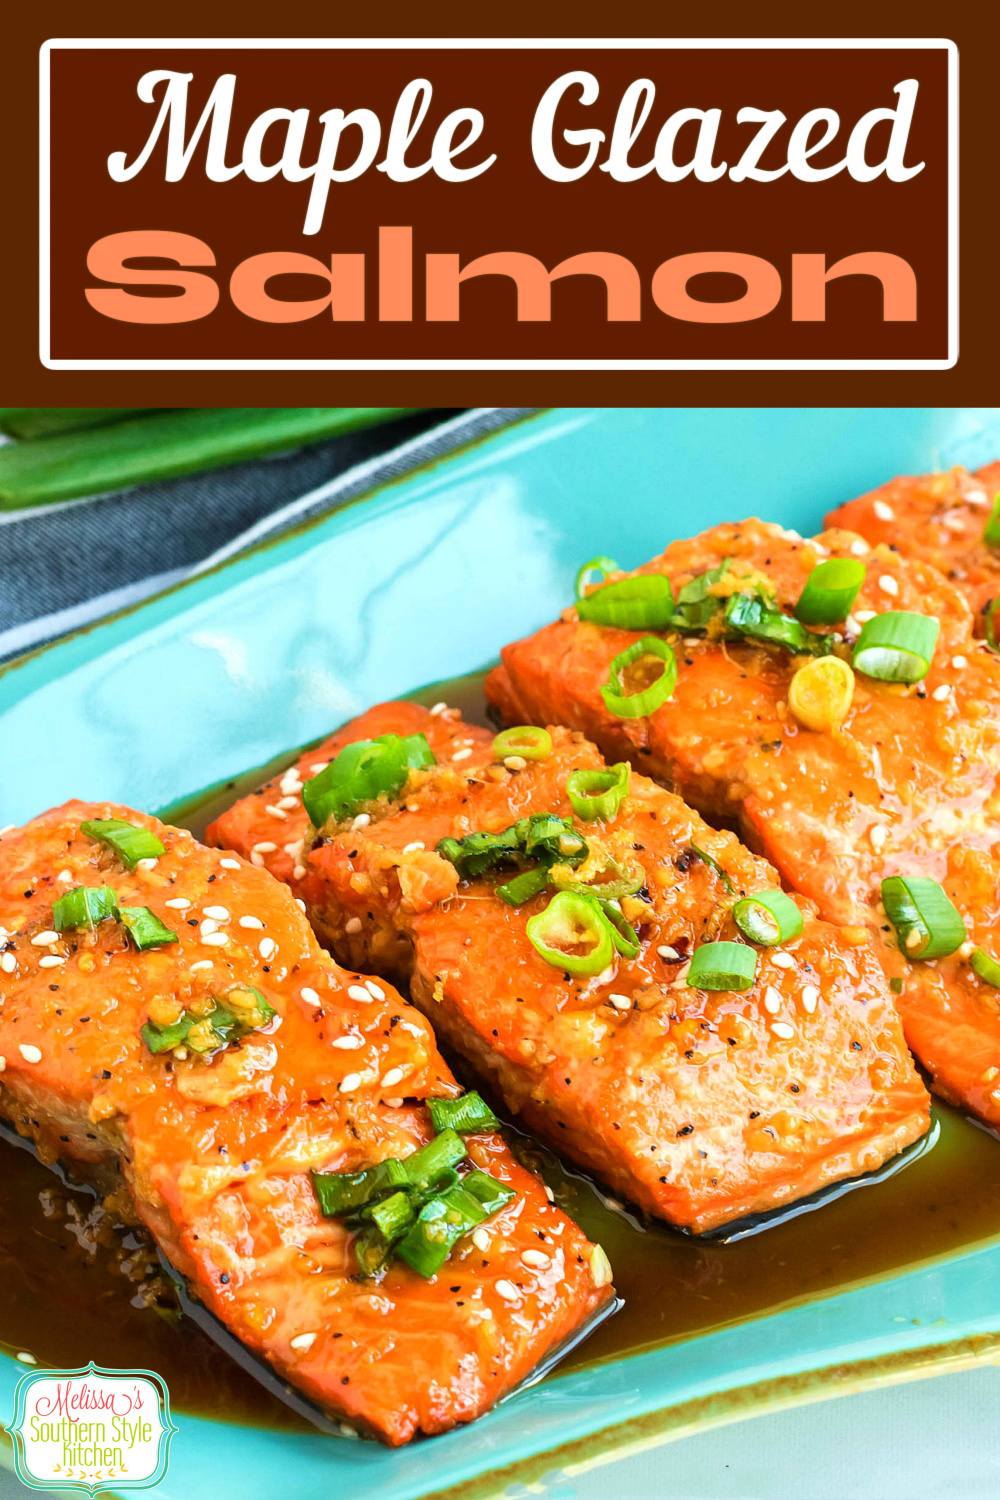 This Maple Glazed Salmon is ready and on the table in minutes #salmon #mapleglazedsalmon #salmonrecipes #dinner #seafoodrecipes #dinnerideas #southernfood #southernrecipes via @melissasssk